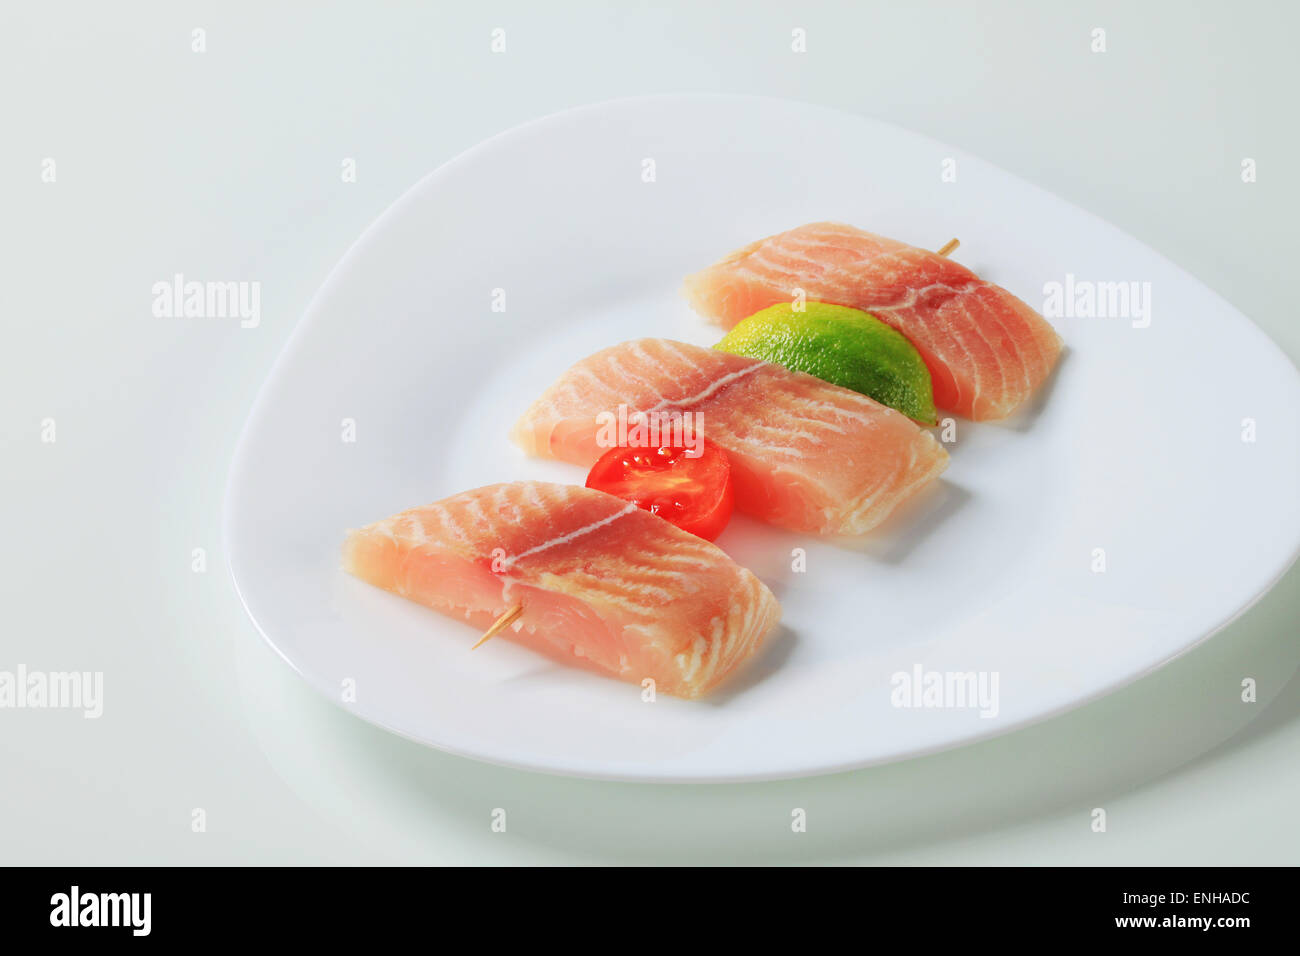 Raw fish skewer on a plate Stock Photo